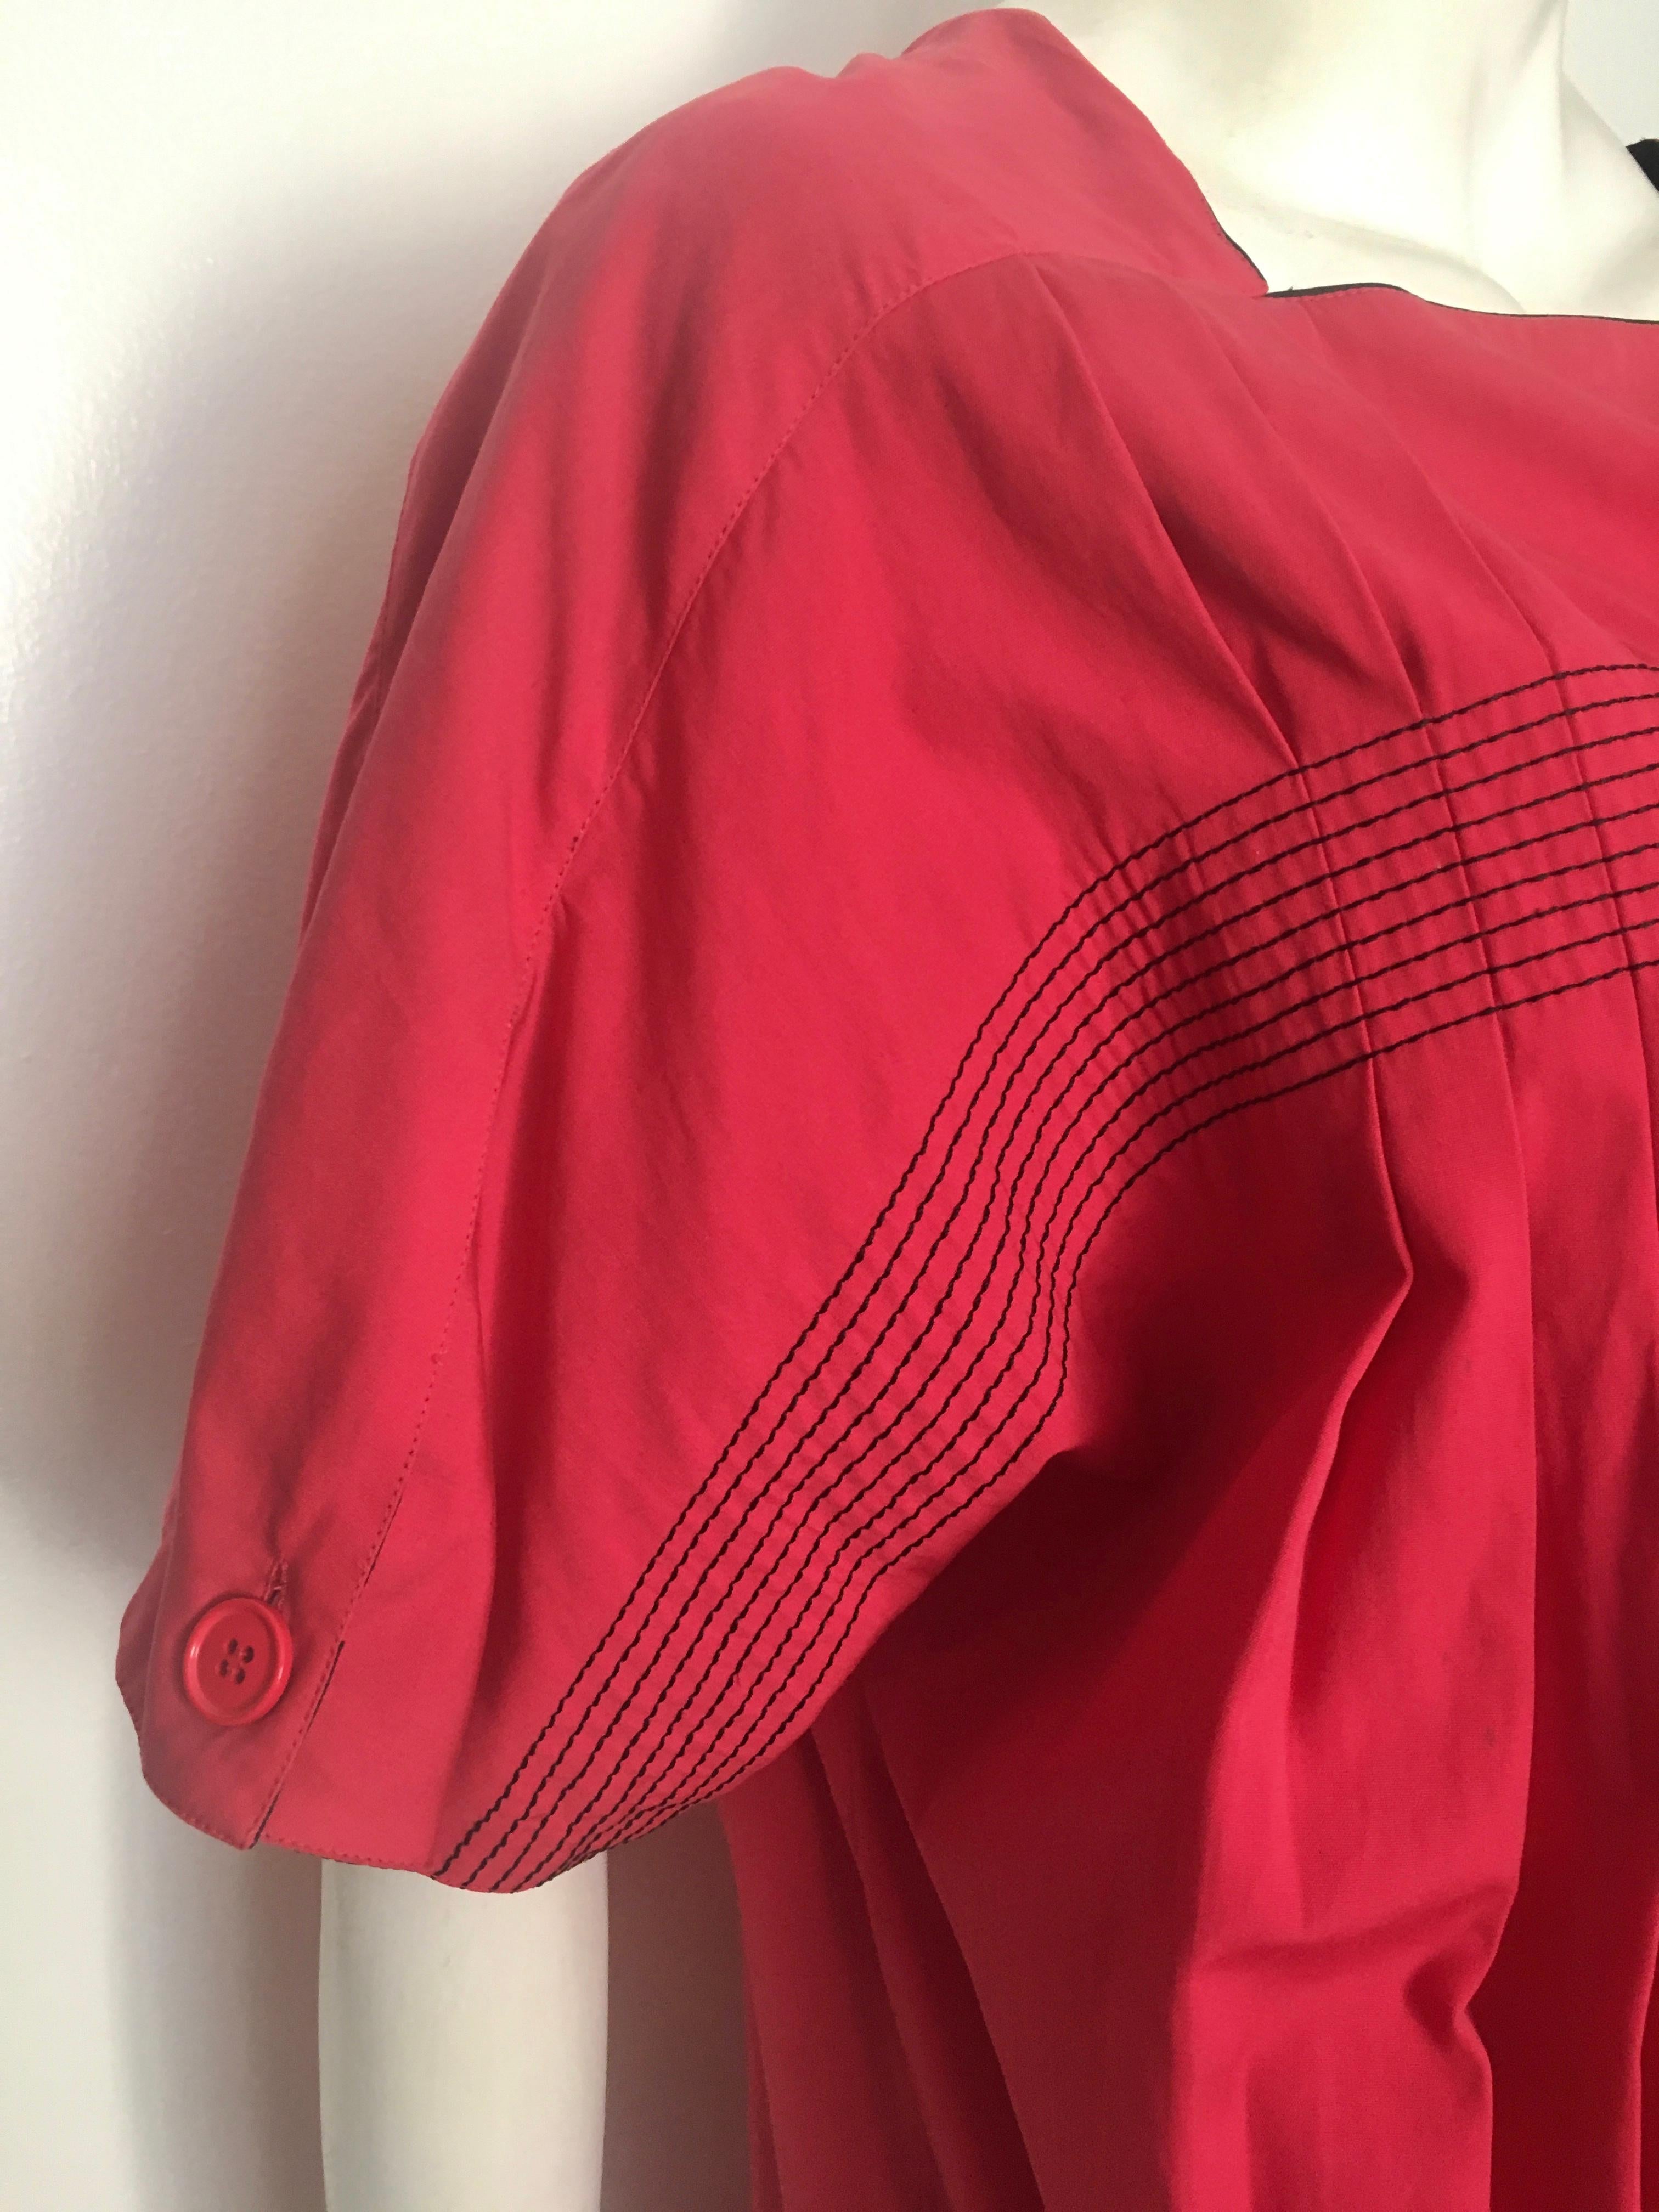 Red Gianfranco Ferre 1980s Cotton Loose Cut Dress Size 6 / 8. For Sale